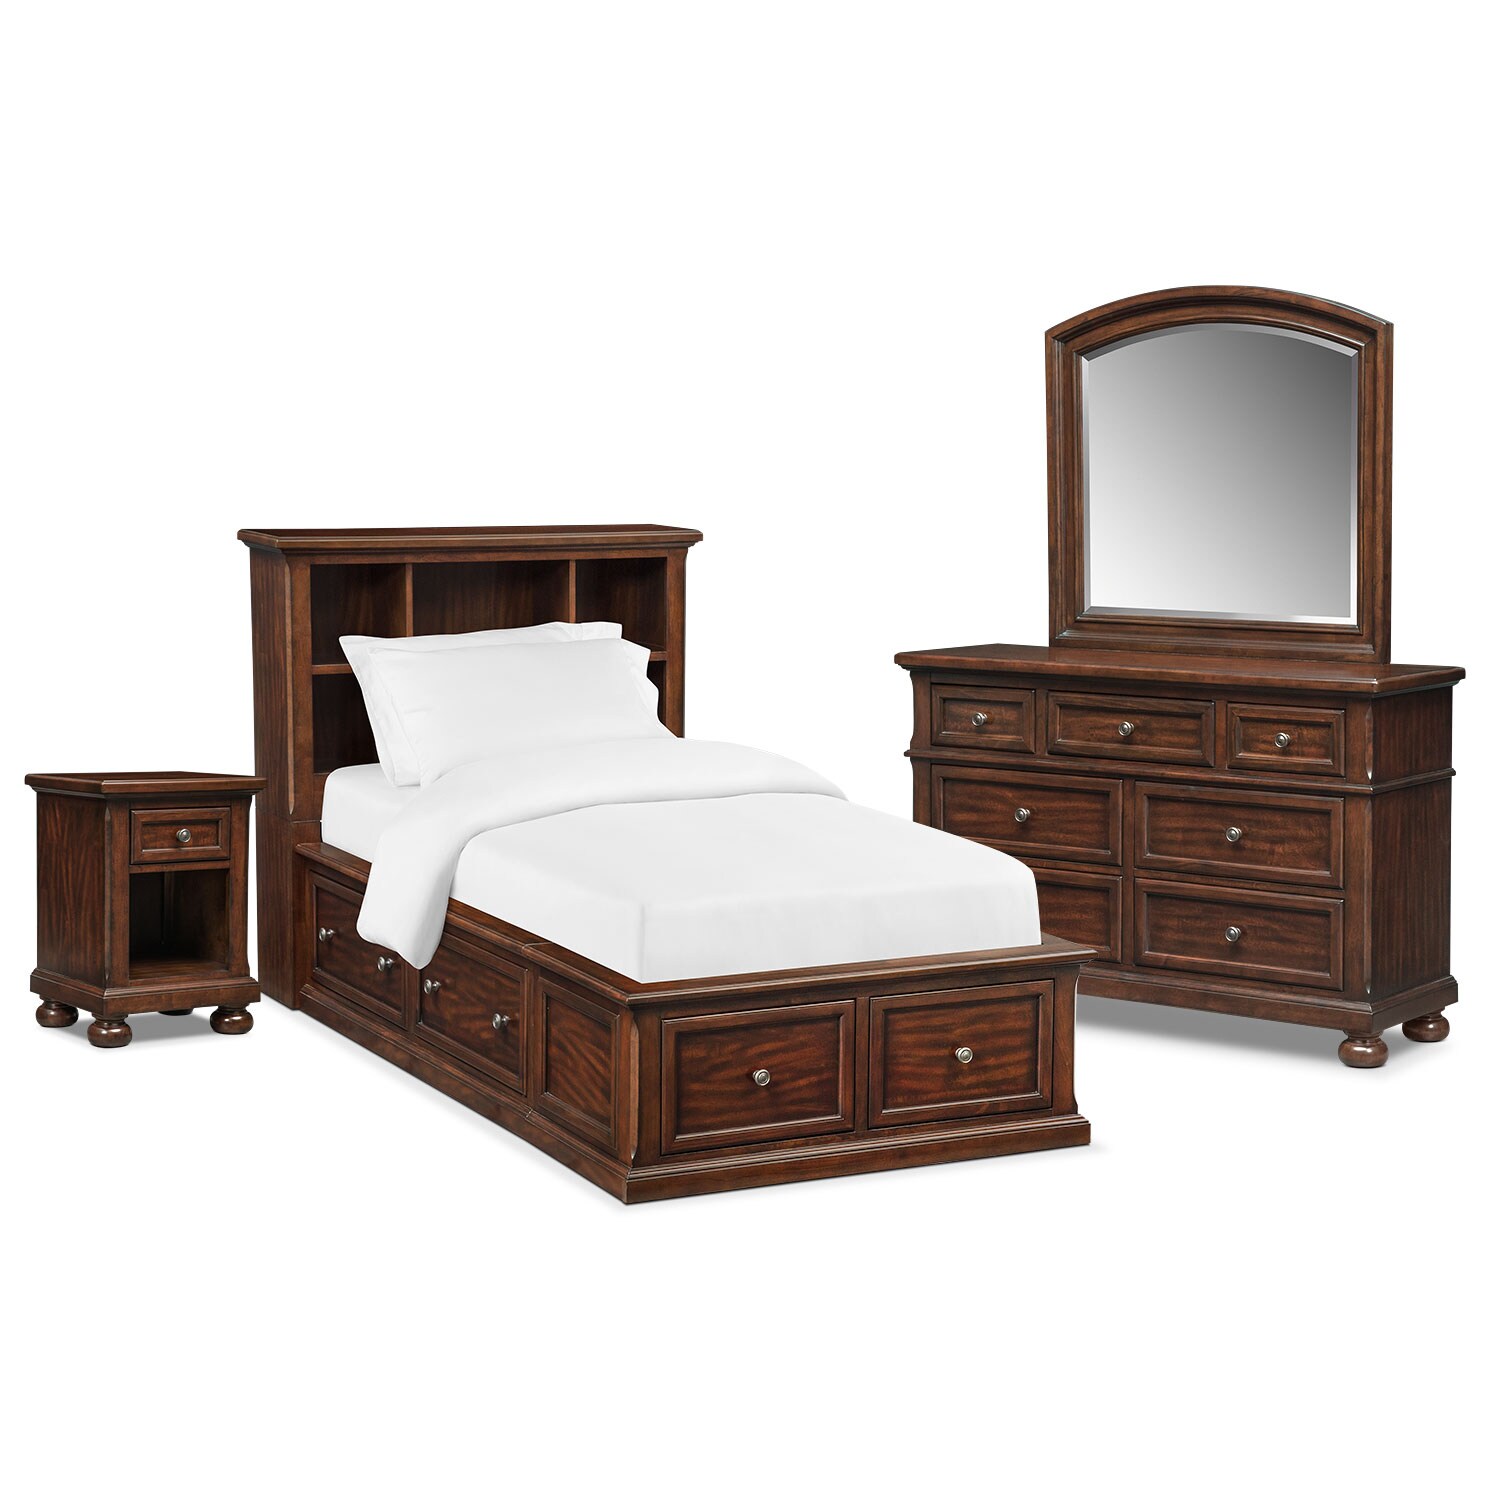 Hanover Youth 6 Piece Bookcase Storage Bedroom Set With Nightstand